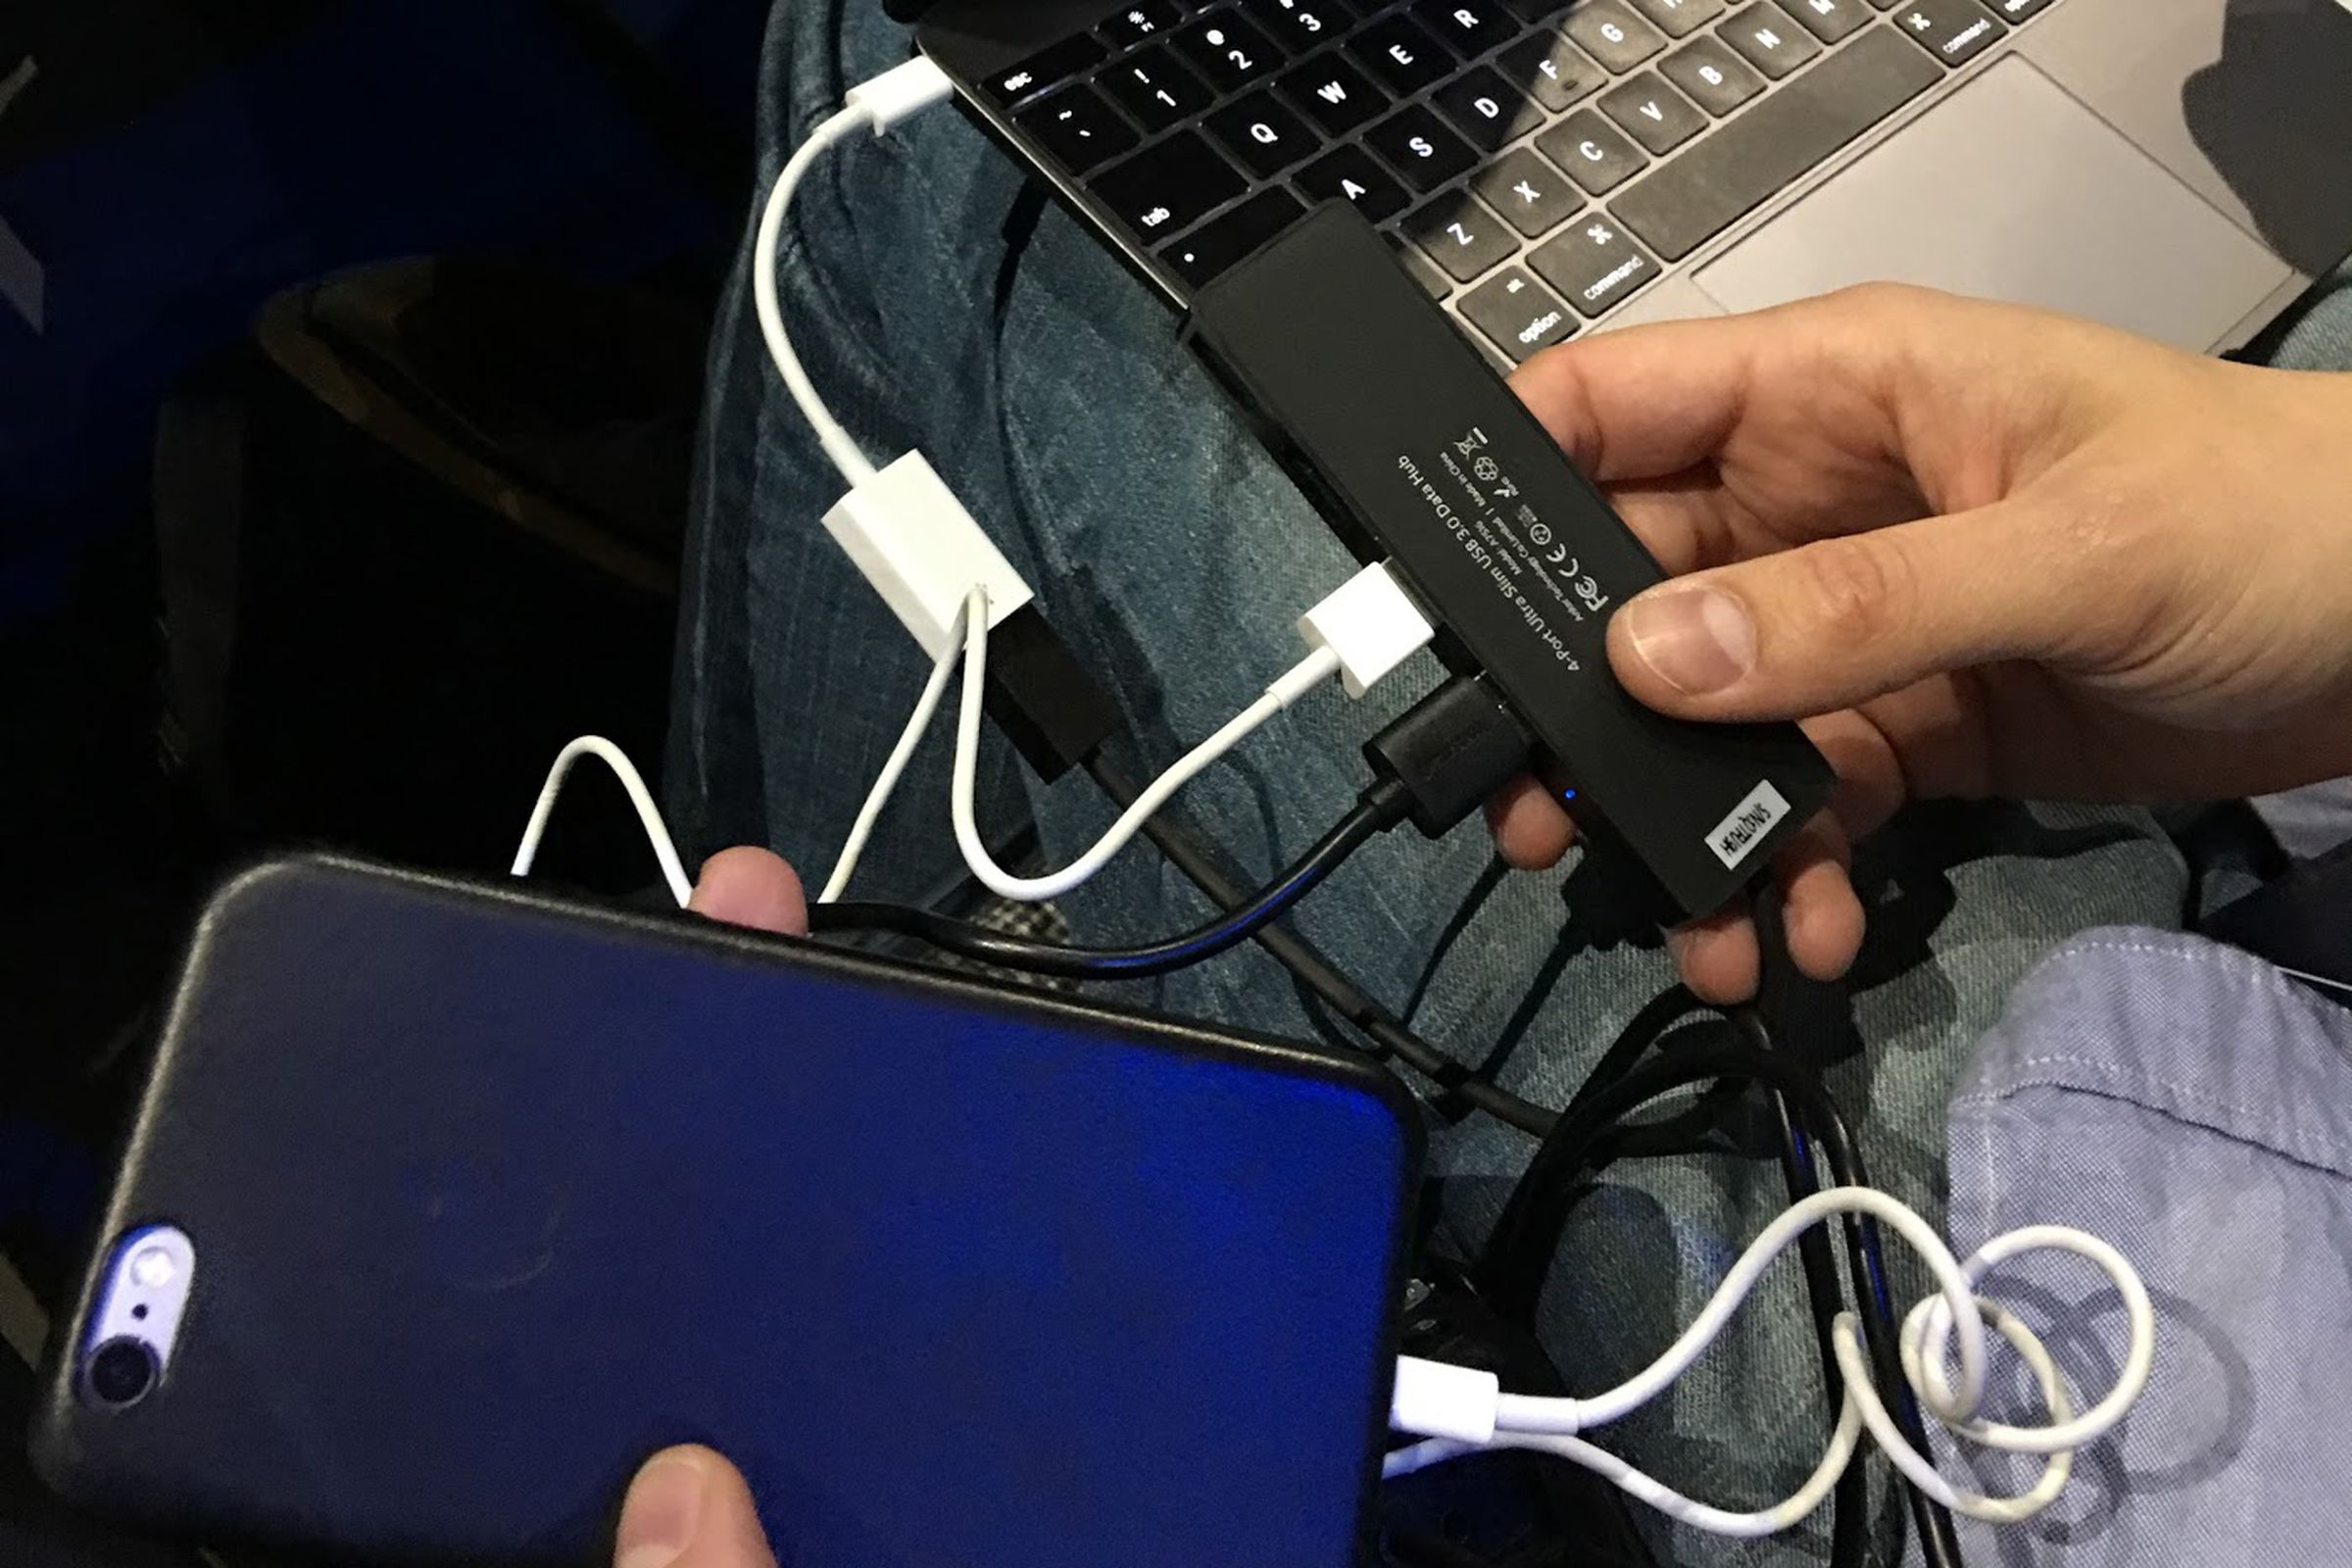 macbook with a bunch of dongles